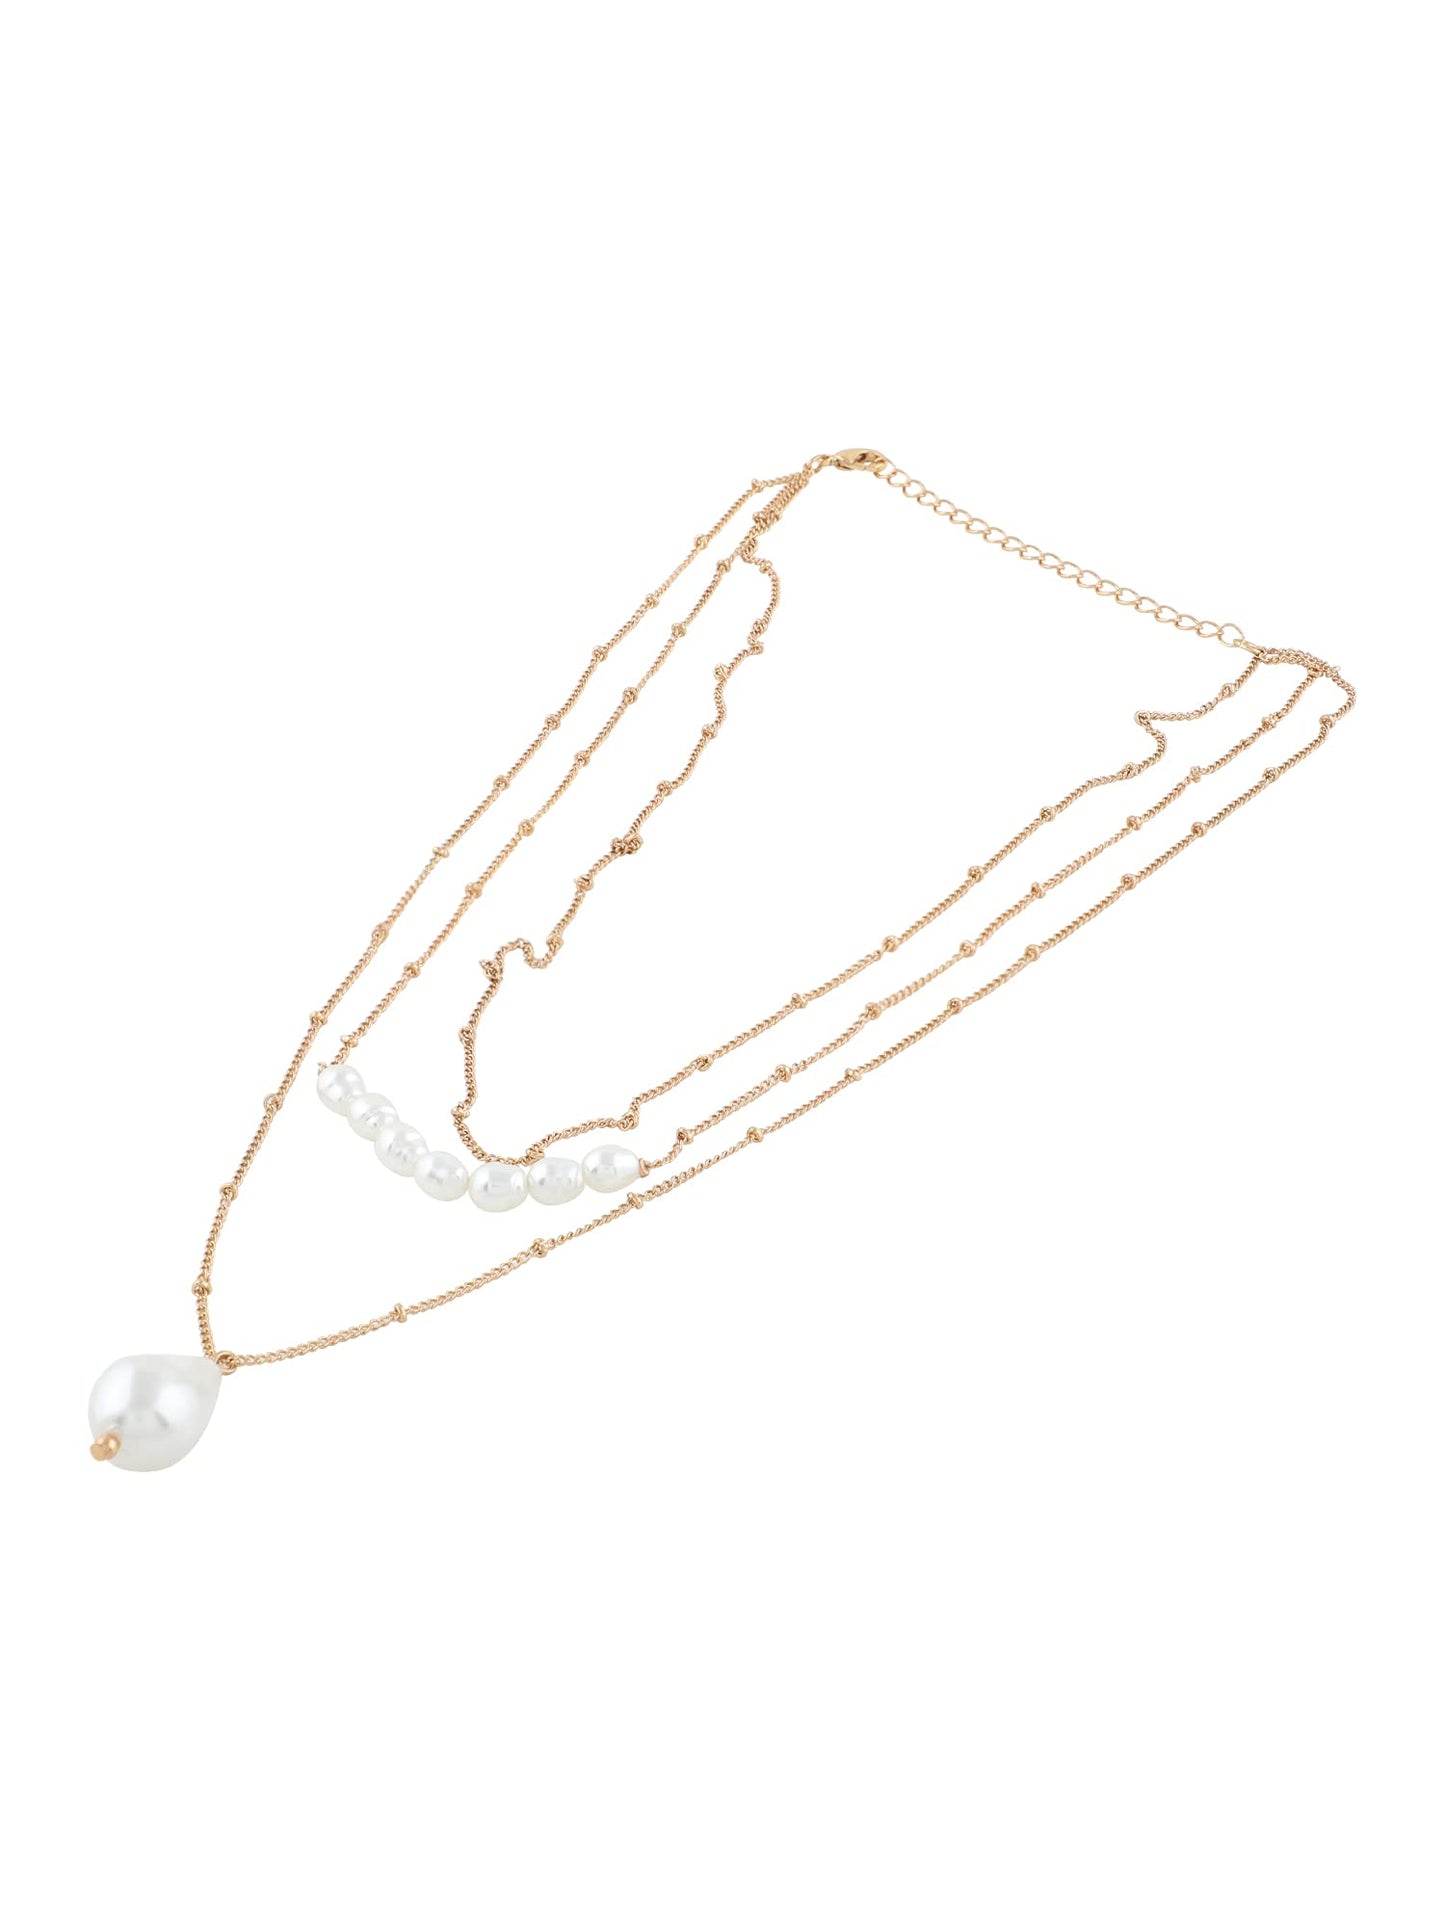 ZAVERI PEARLS Gold Tone Contemporary 3 Layers Pearl Necklace Chain With Earring-Zpfk10604